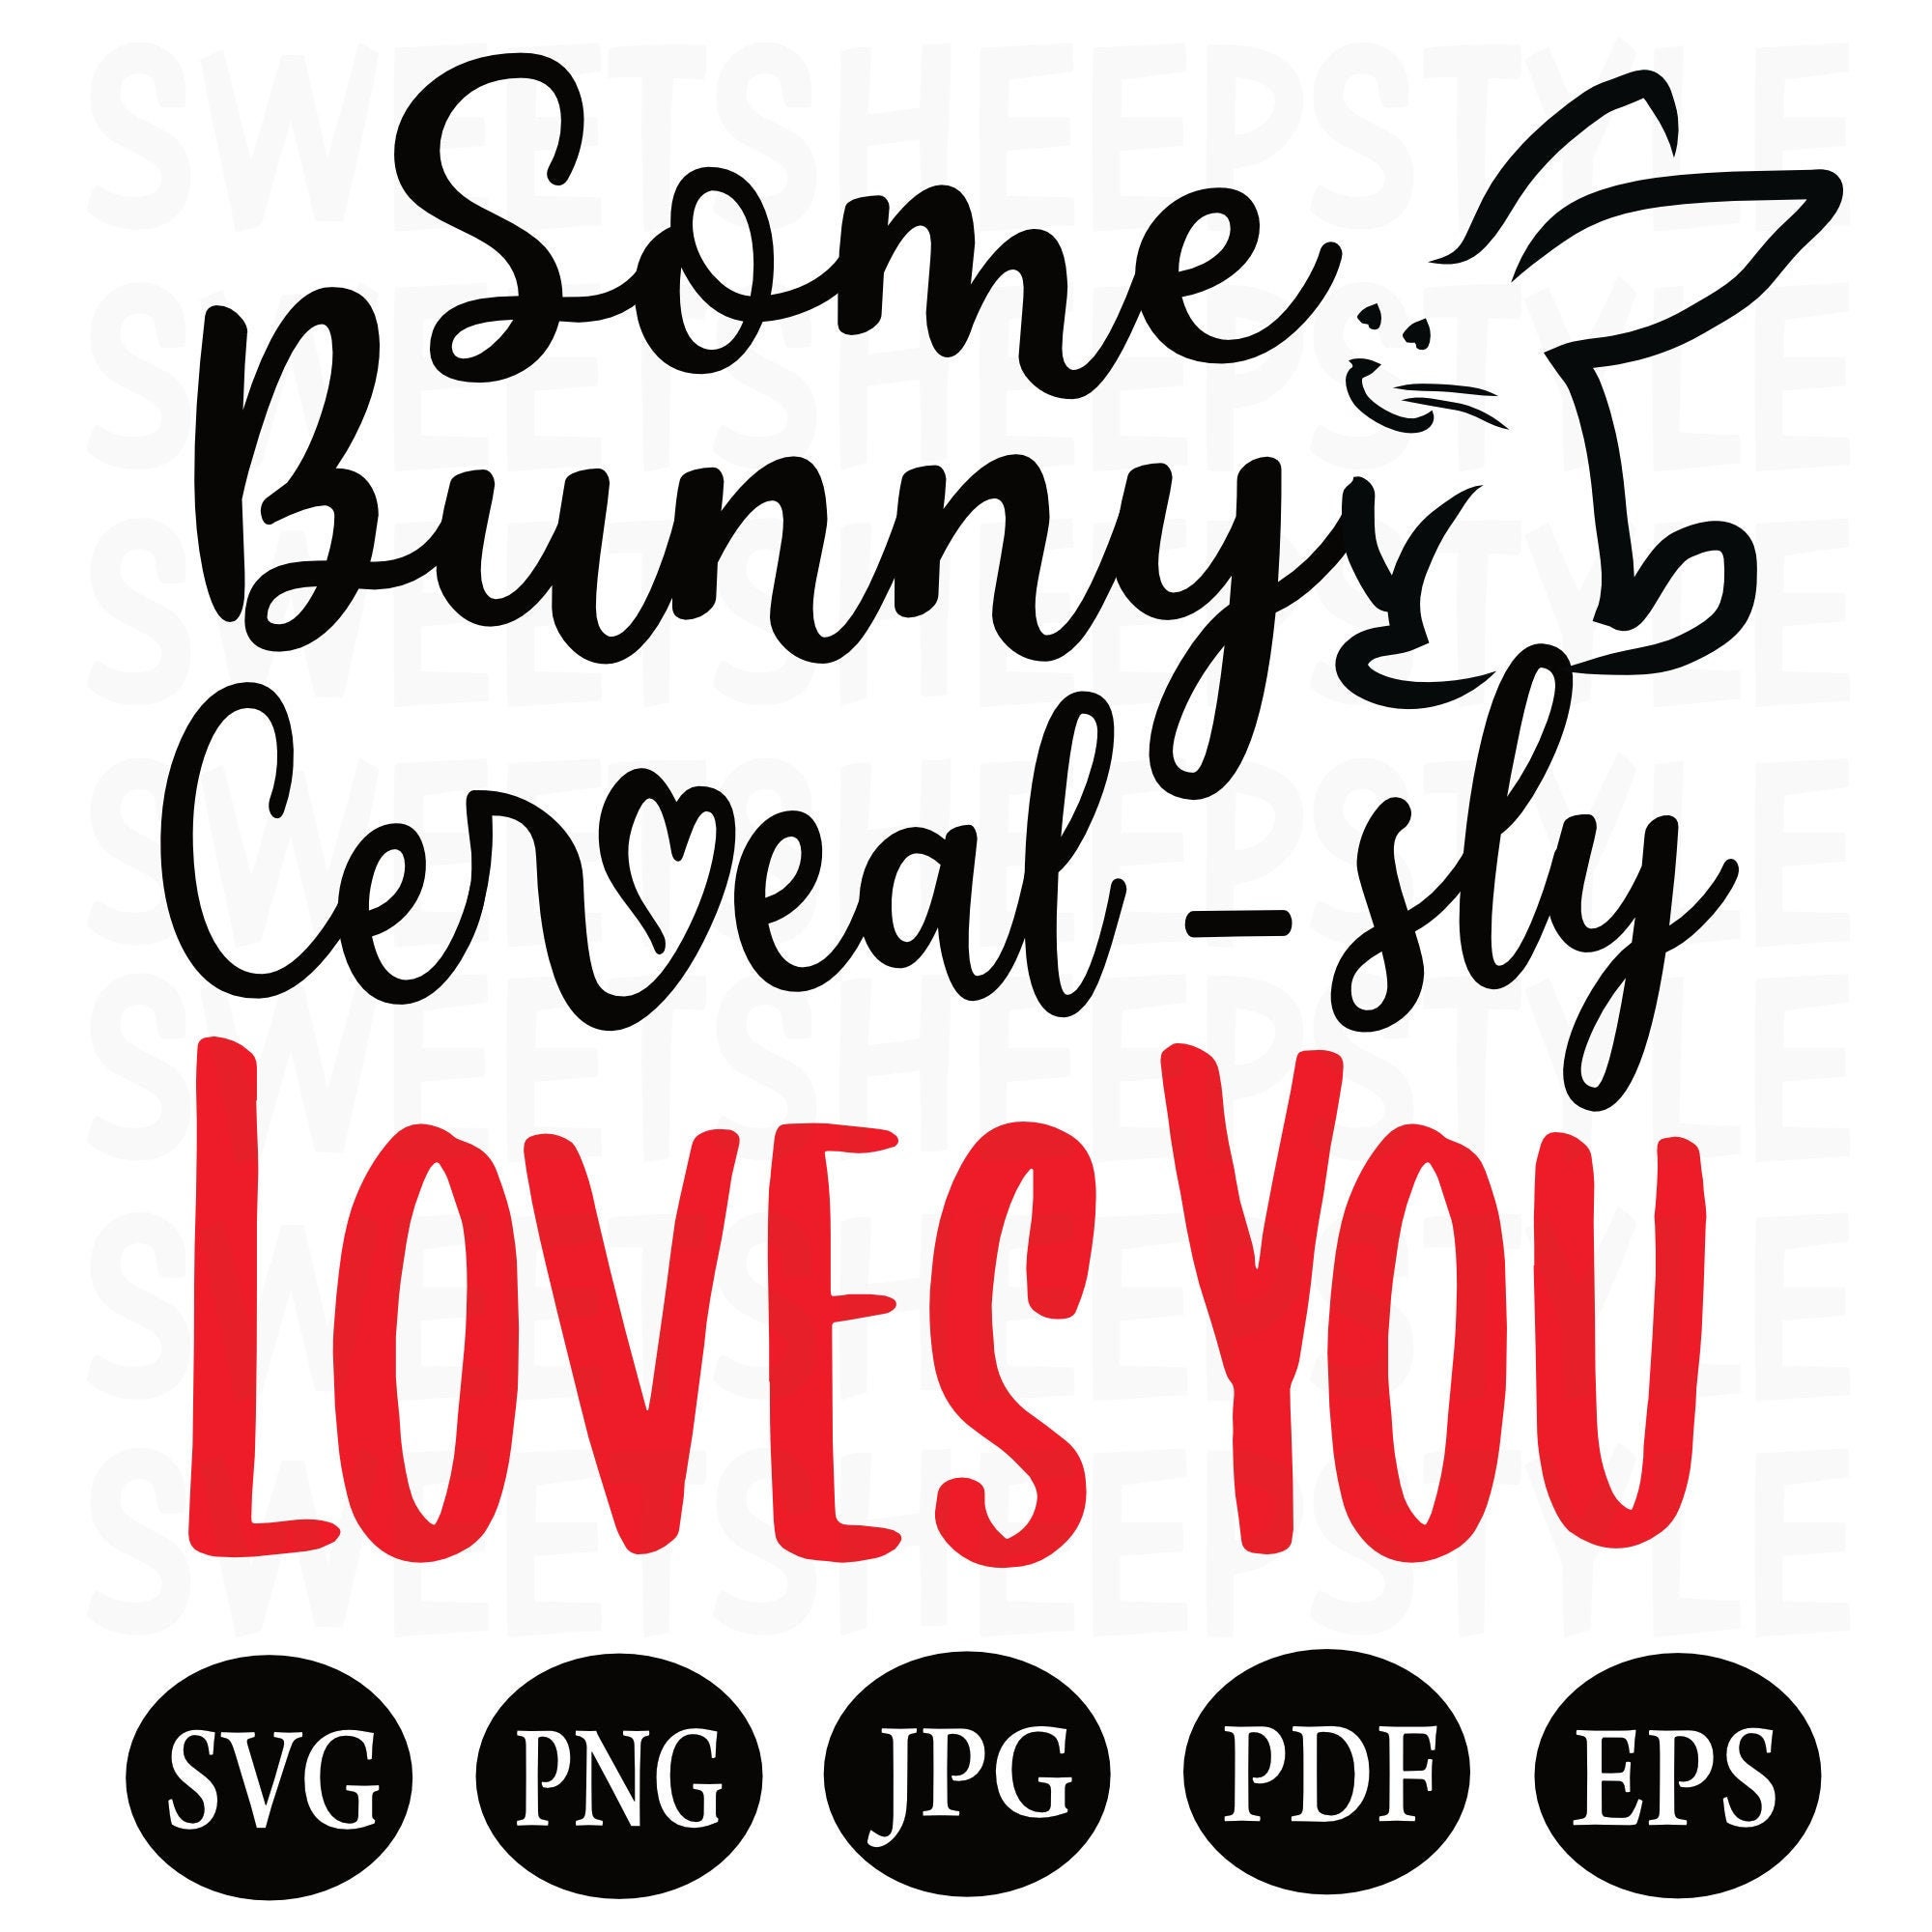 Some Bunny Cereal-sly Loves You SVG happy easter svg Cereal | Etsy